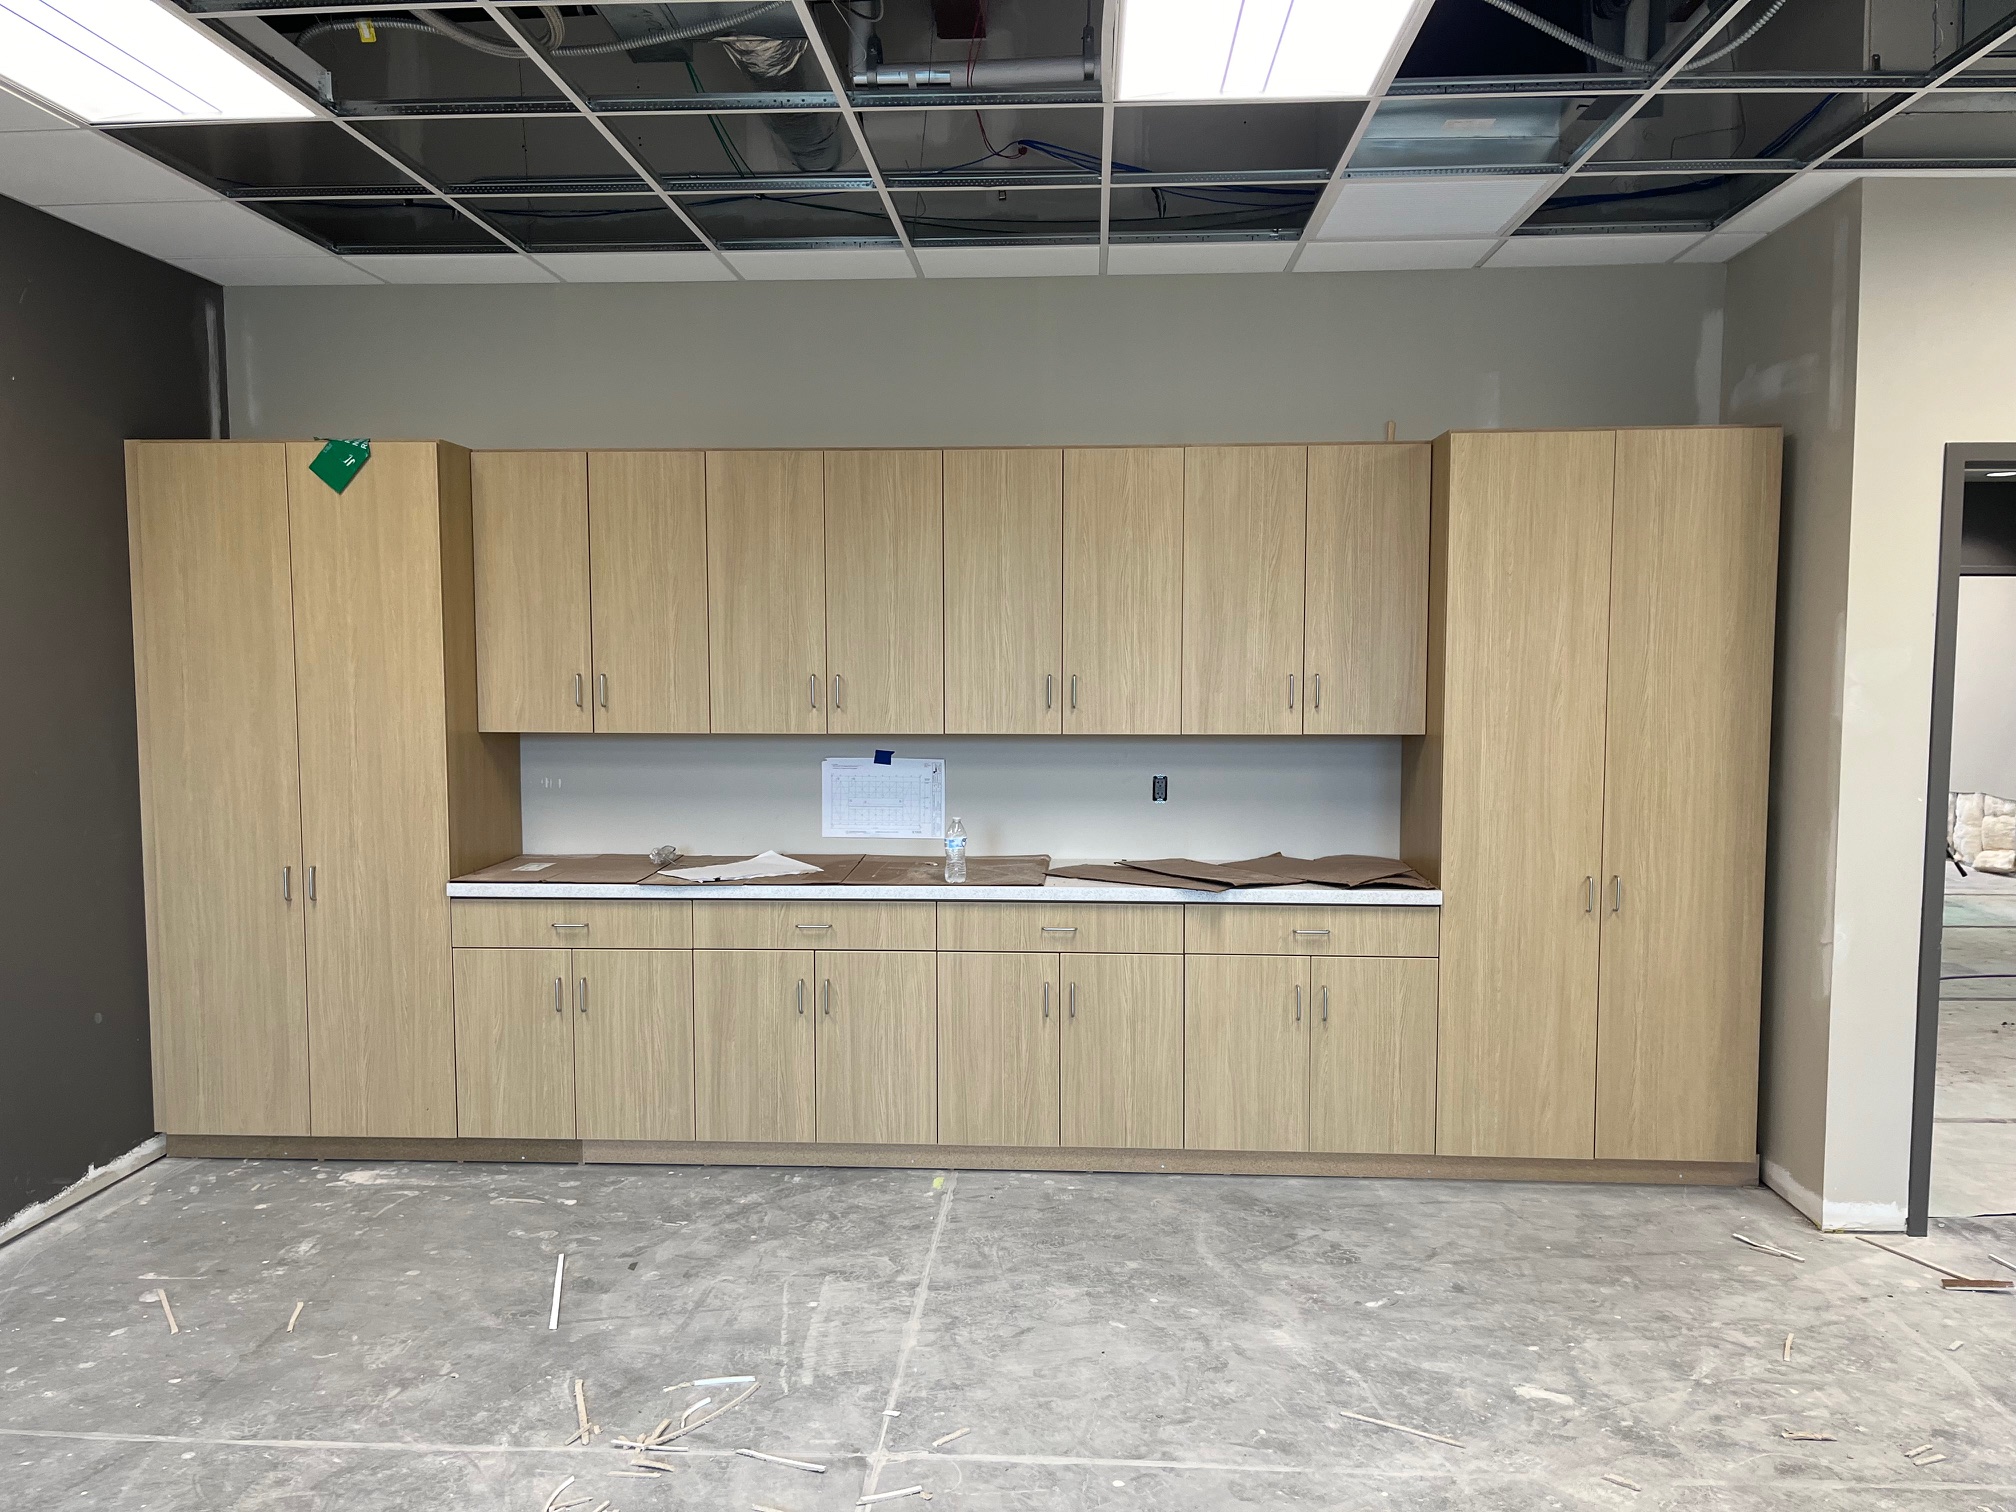 High School wing, classroom cabinetry